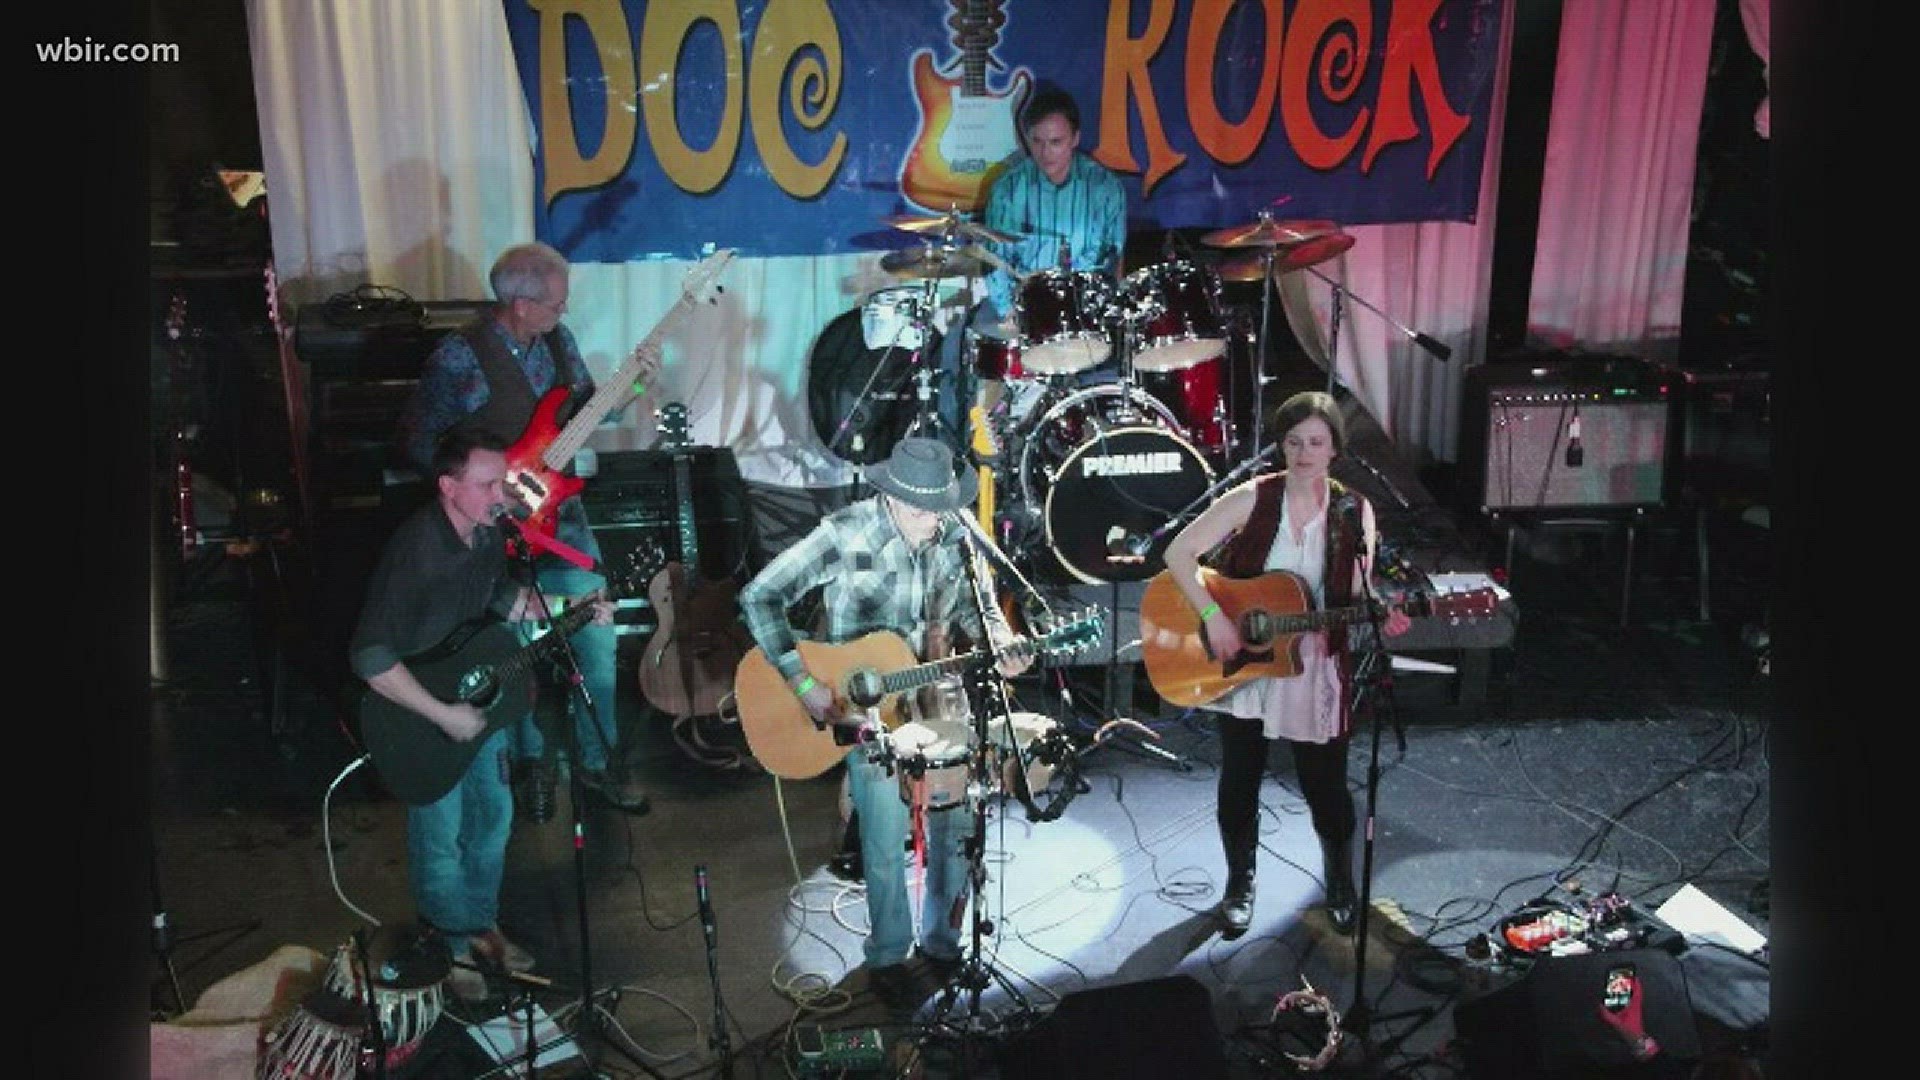 The Knoxville Academy of Medical Alliance will host Doc Rock 2018 on Jan. 19 at the International. Show starts at 7:30pm. Tickets are $20 at the door. For more information visit kamalliance.orgJanuary 18, 2018-4pm